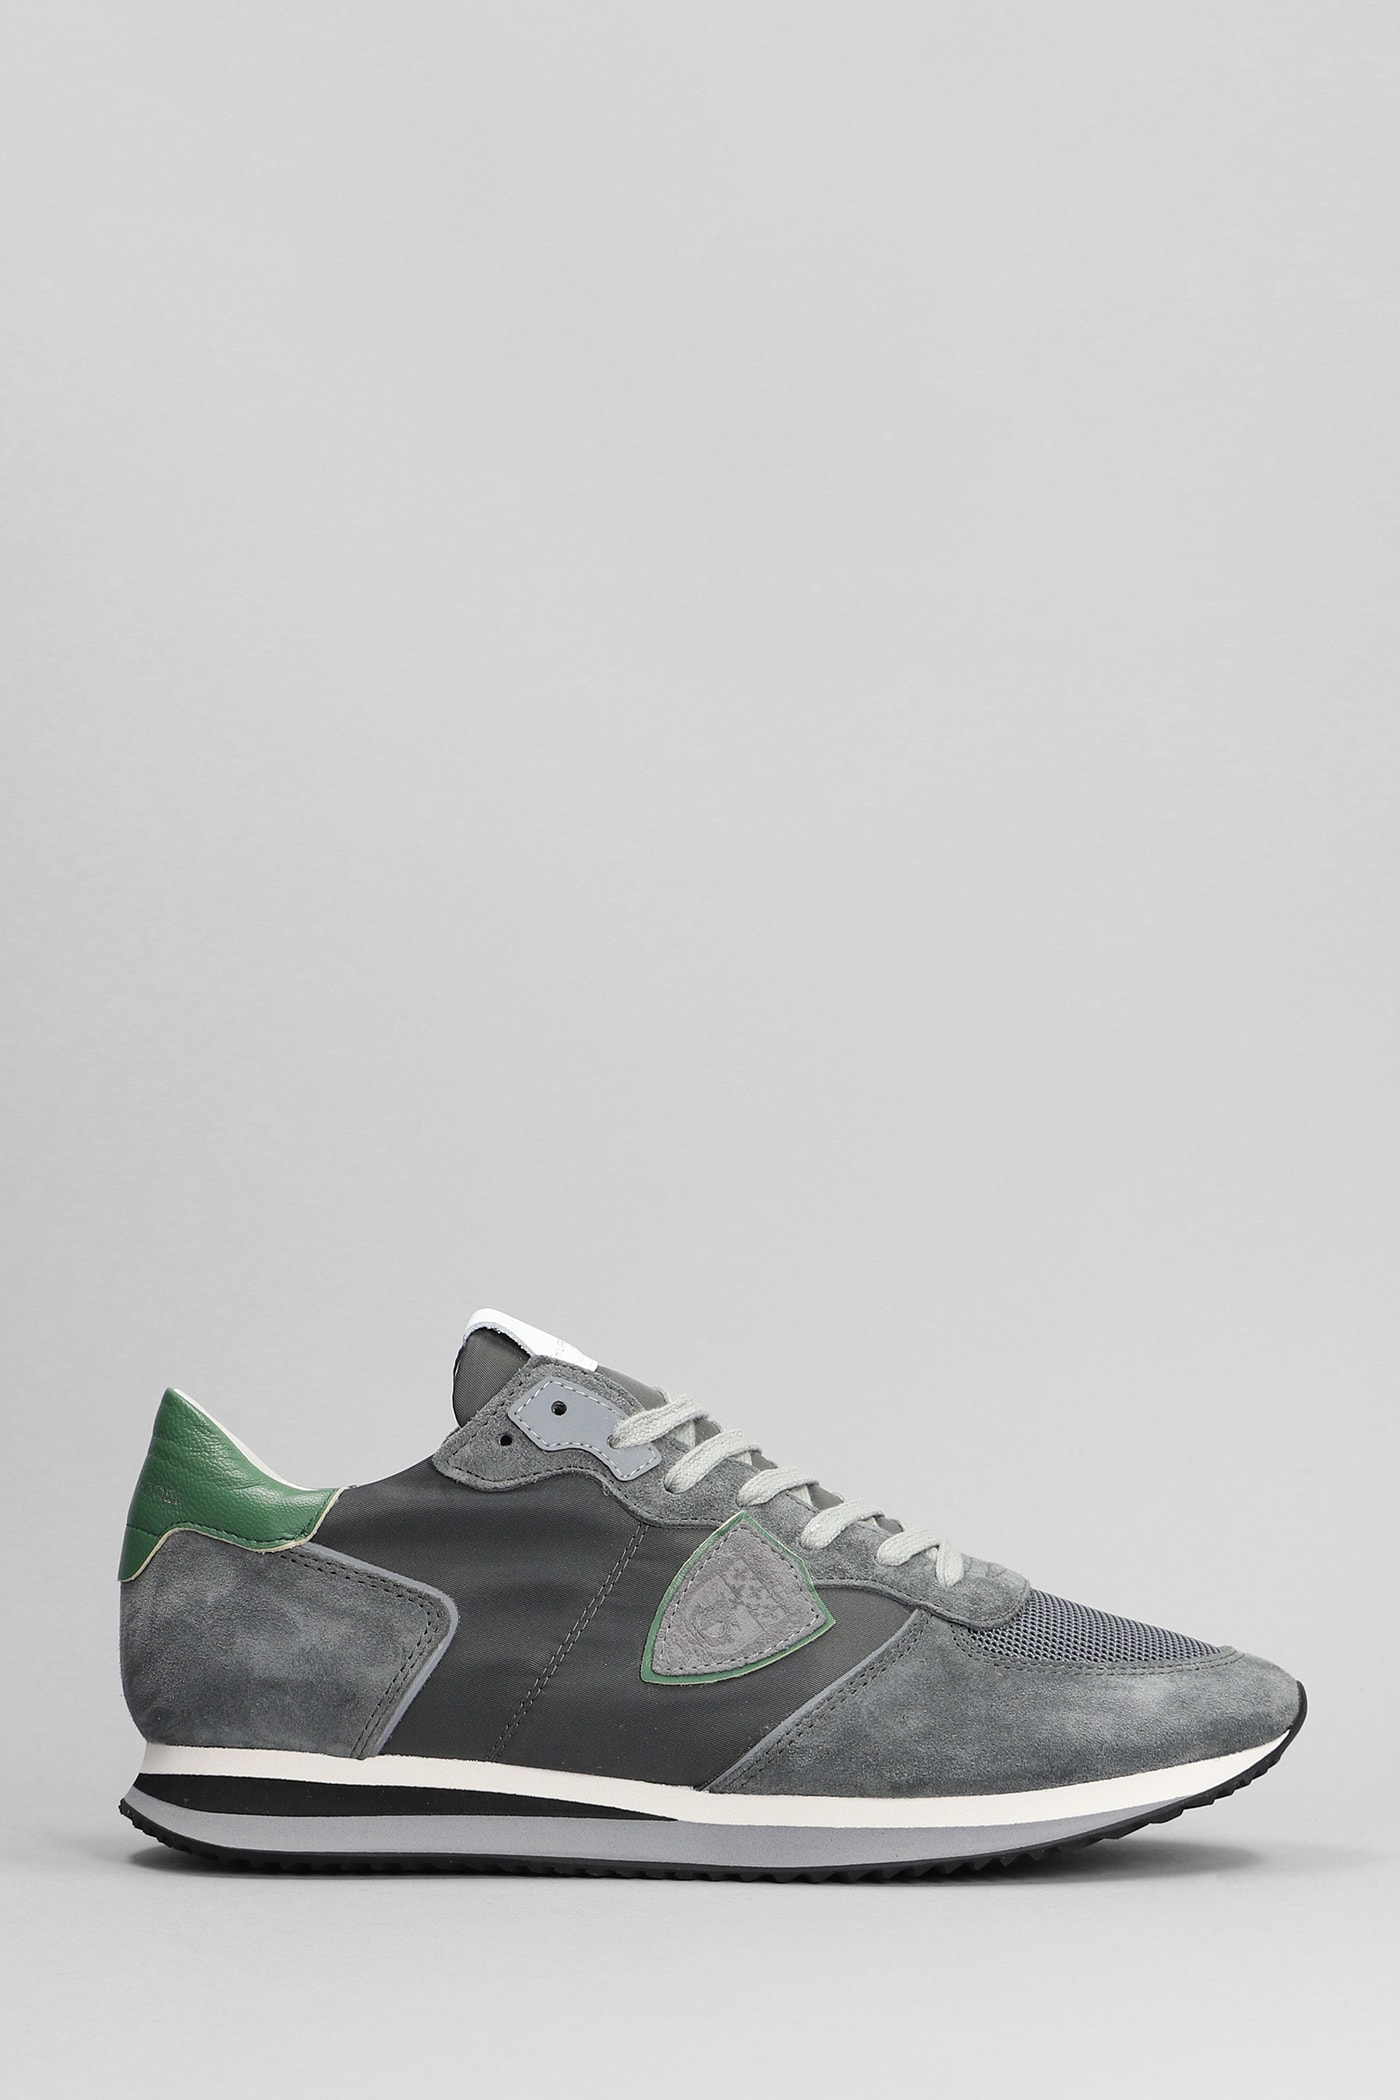 PHILIPPE MODEL TRPX SNEAKERS IN GREY SUEDE AND FABRIC